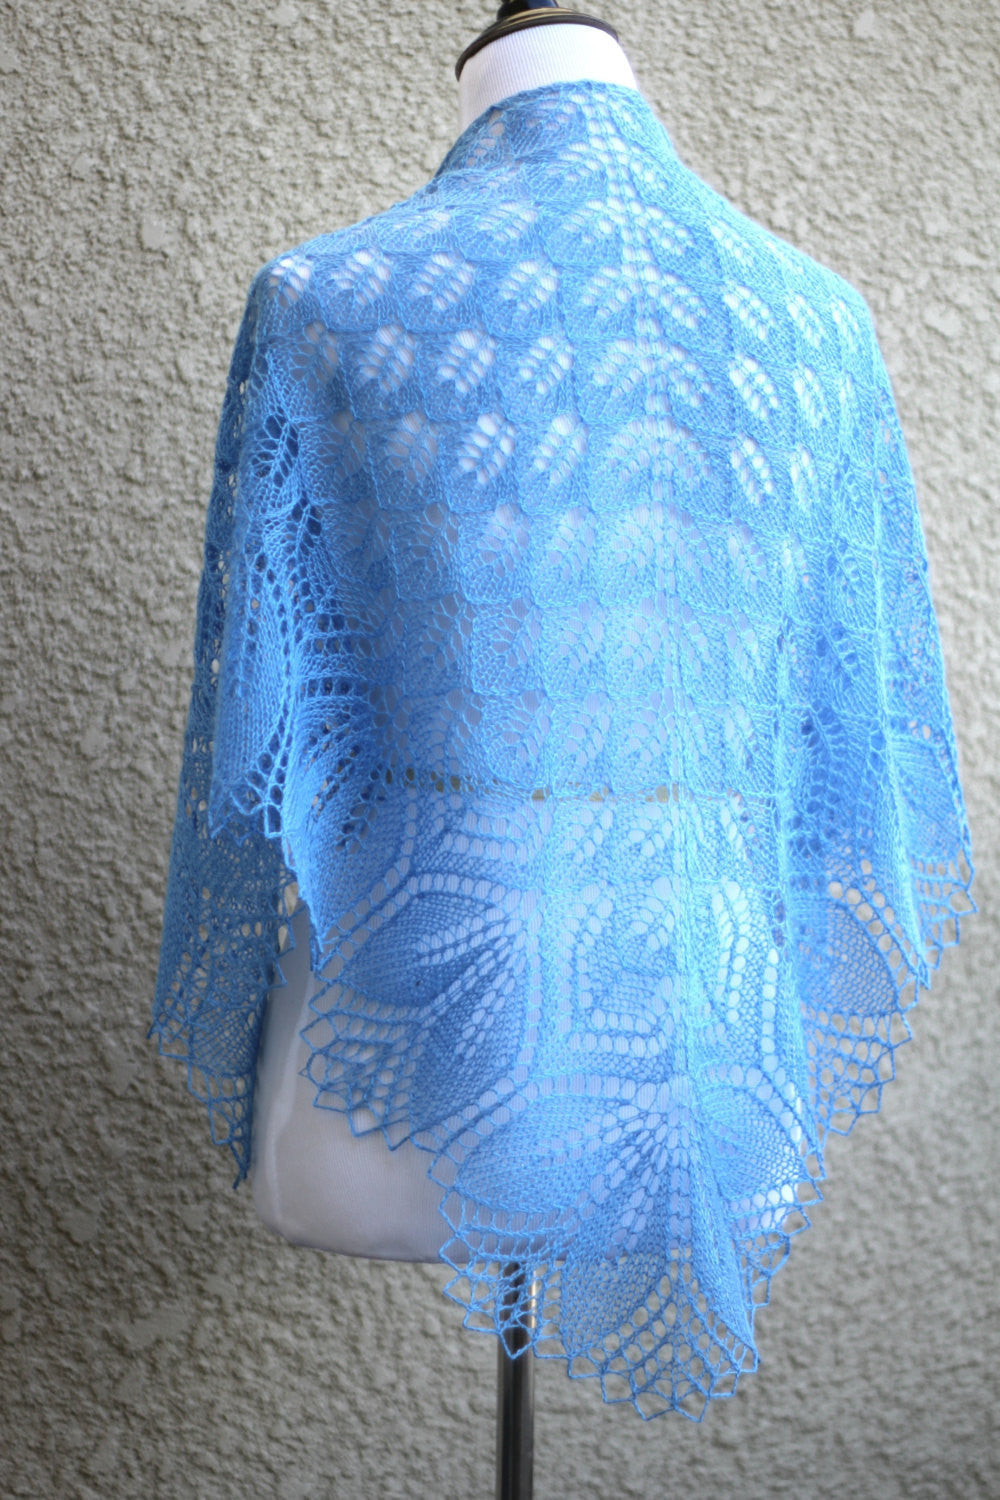 Knitted lace shawl